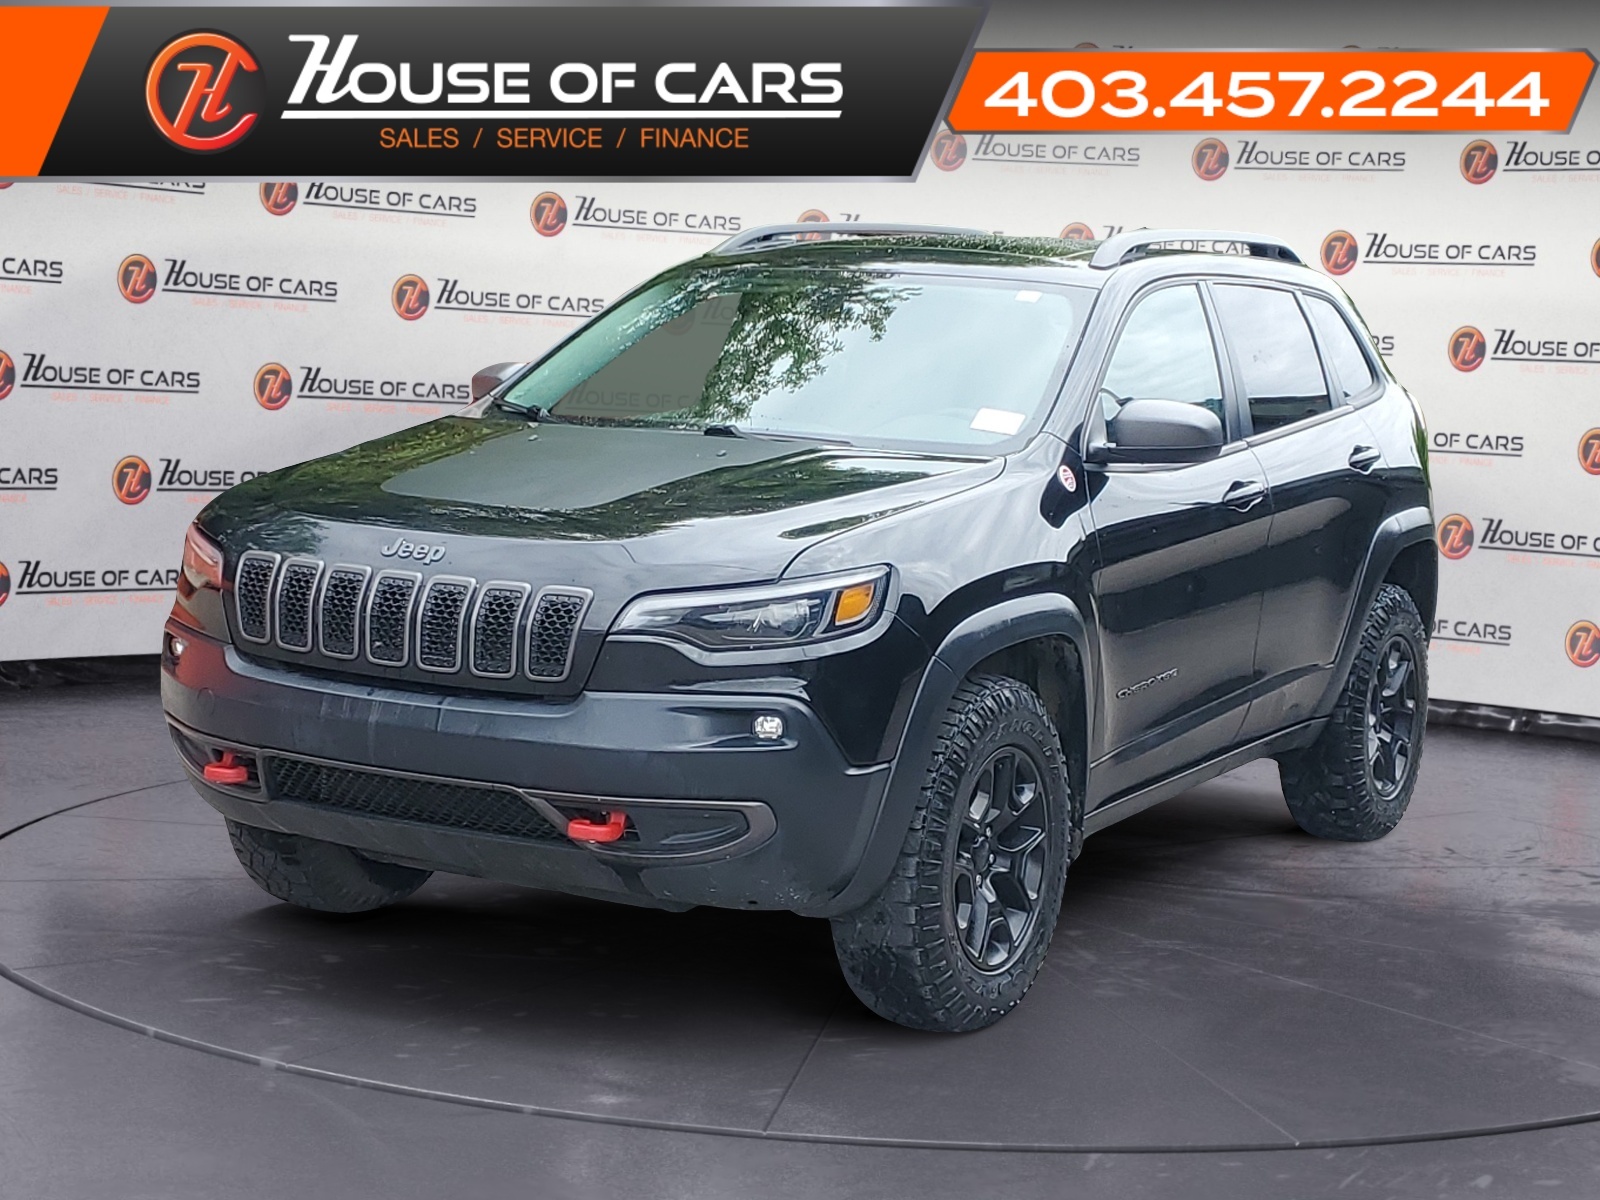 2019 Jeep Cherokee Trailhawk 4x4 Off-Road Tires Leather Seats 